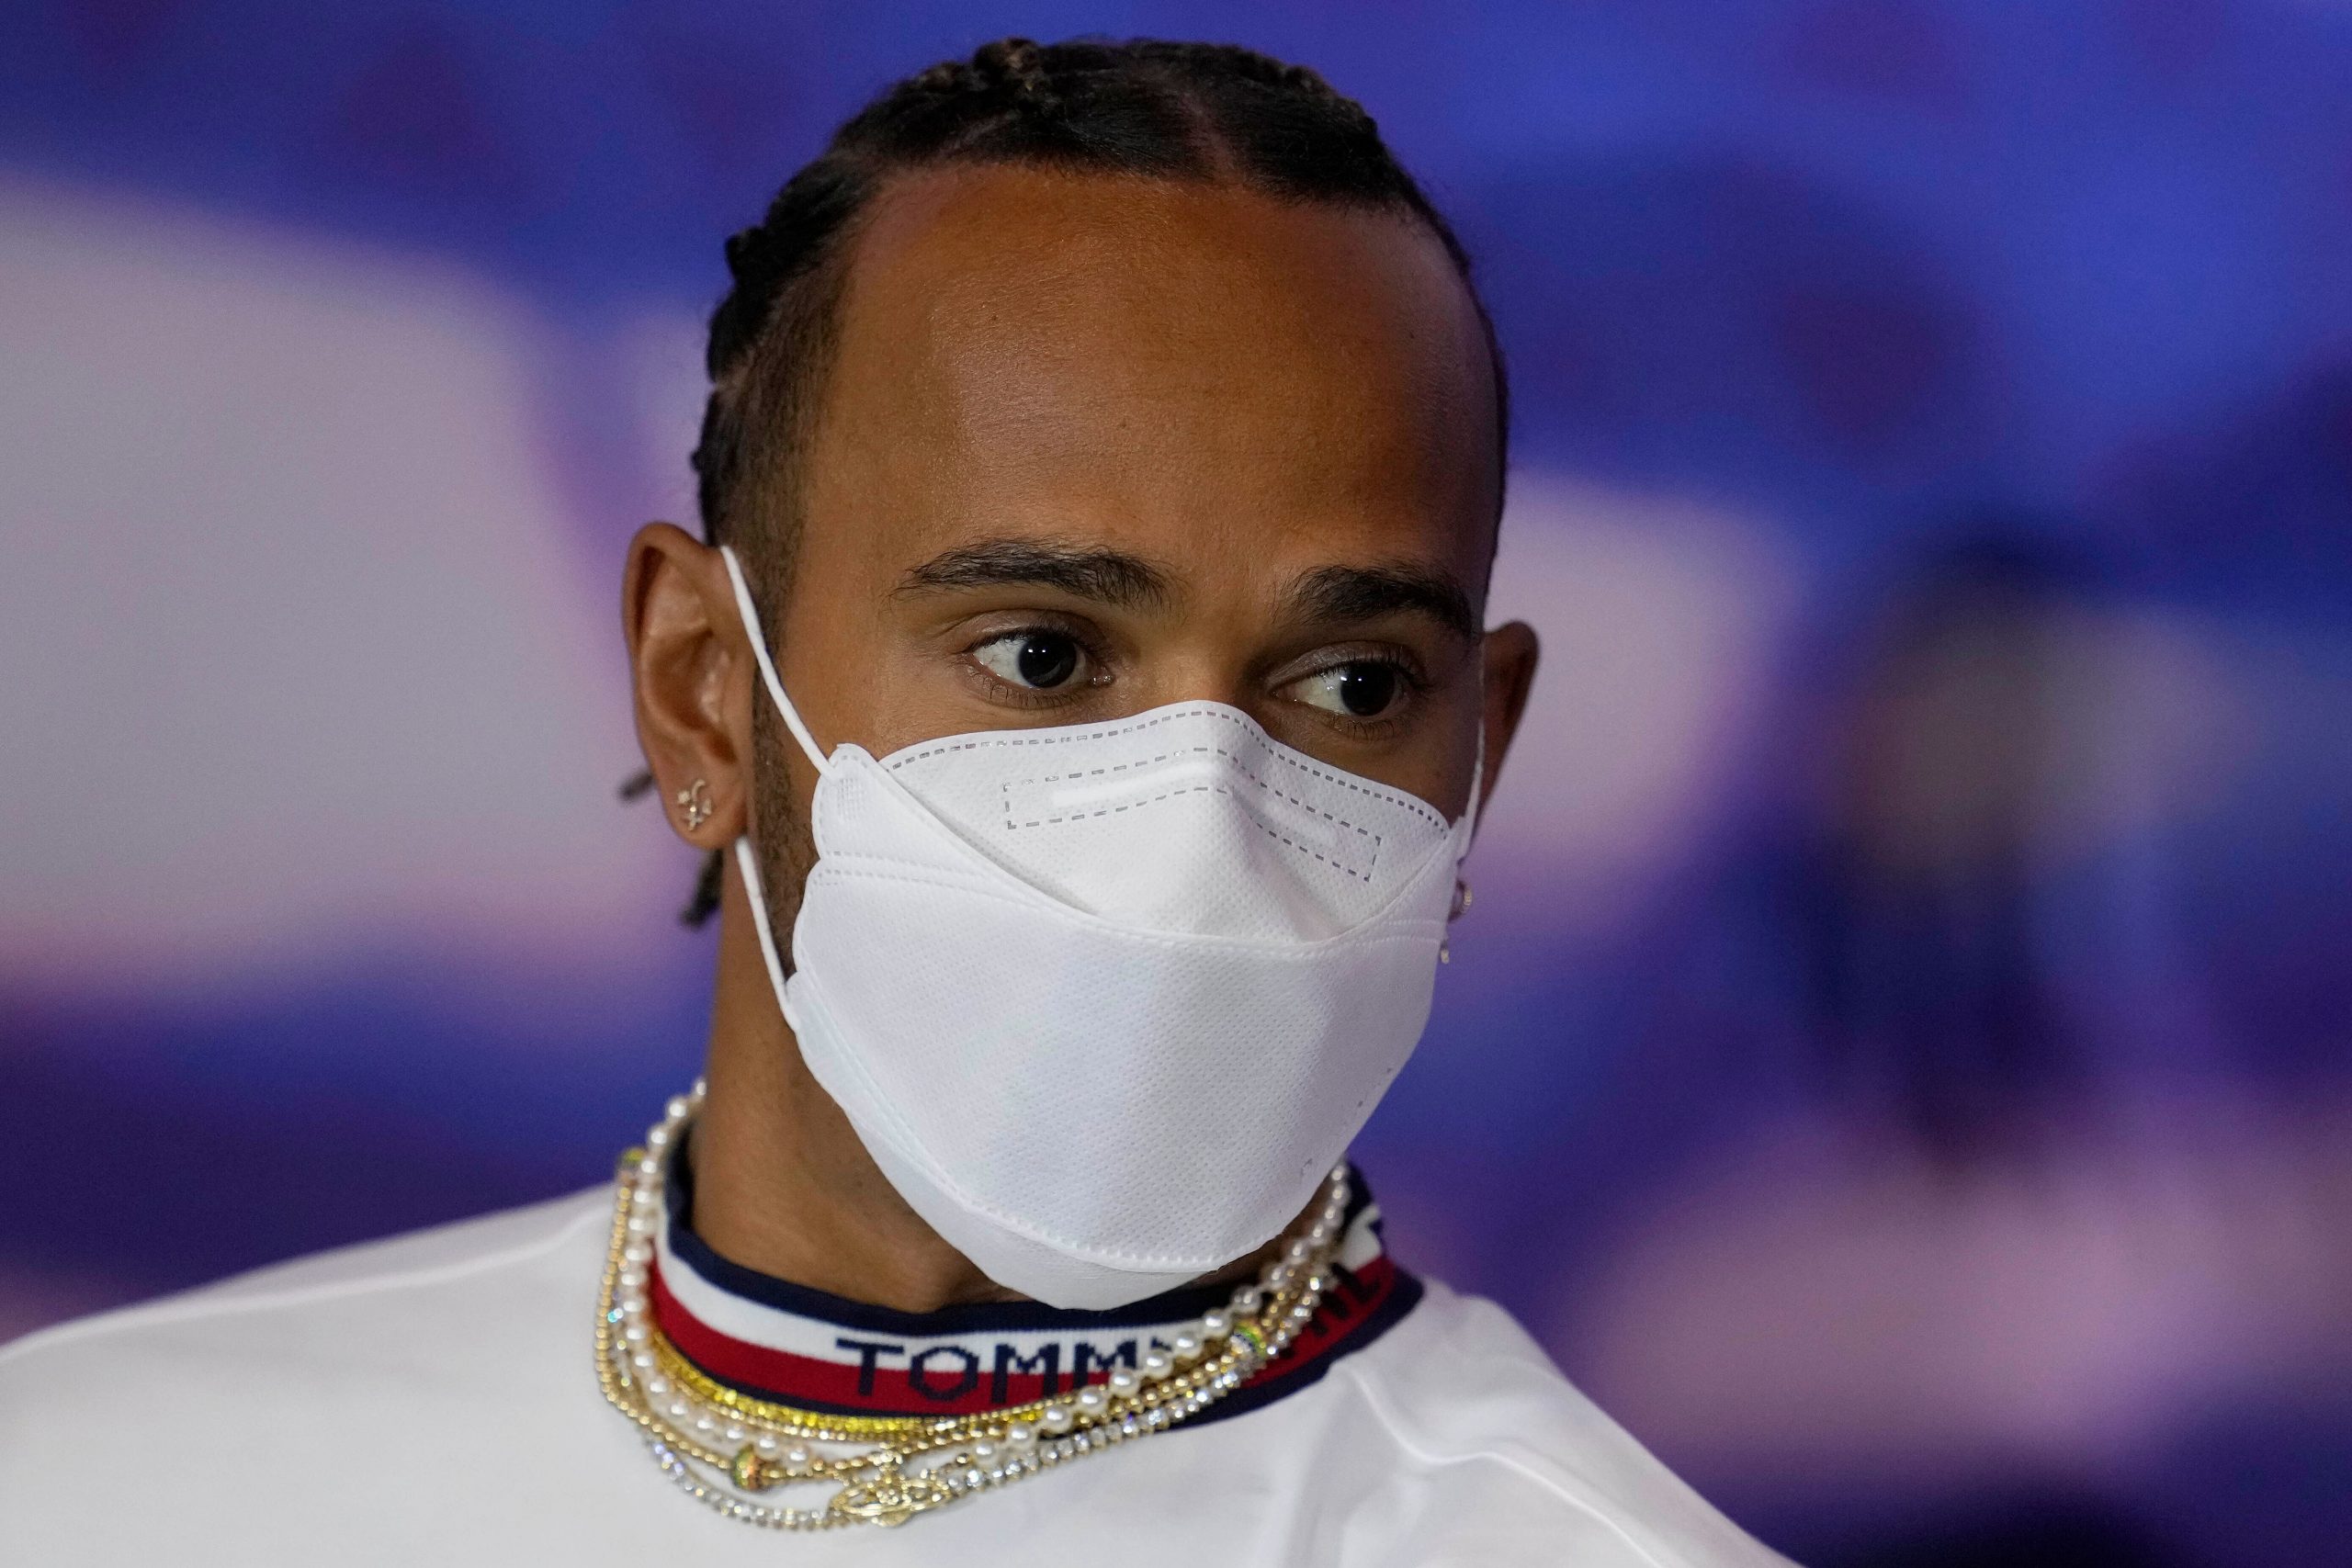 And the stud is gone: Hamilton  backs down in F1 jewellery row at British GP